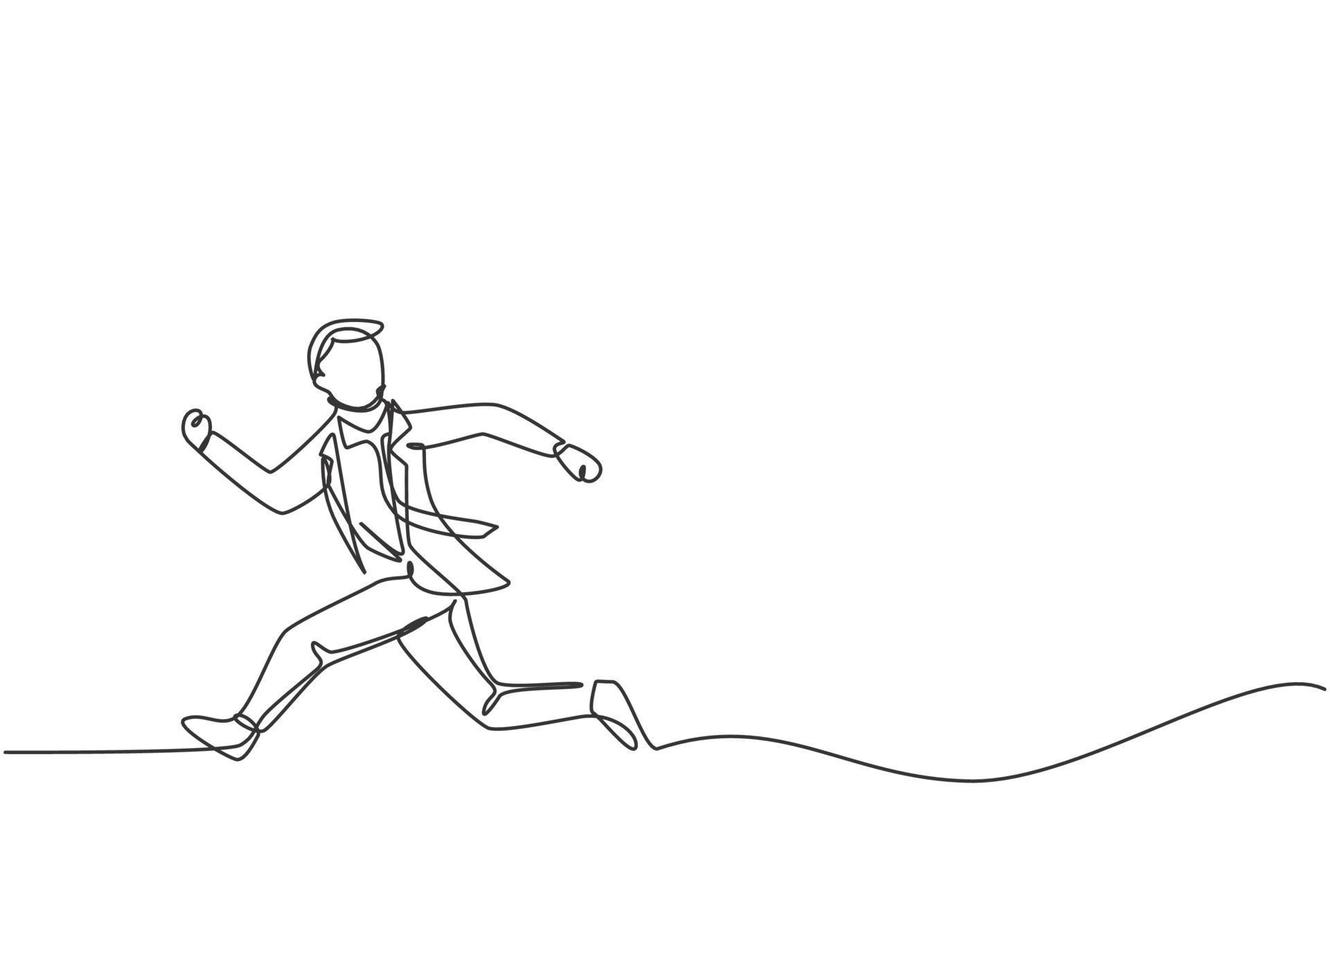 Single one line drawing of young business man running chased by work deadline. Business time discipline metaphor concept. Modern continuous line draw design graphic vector illustration